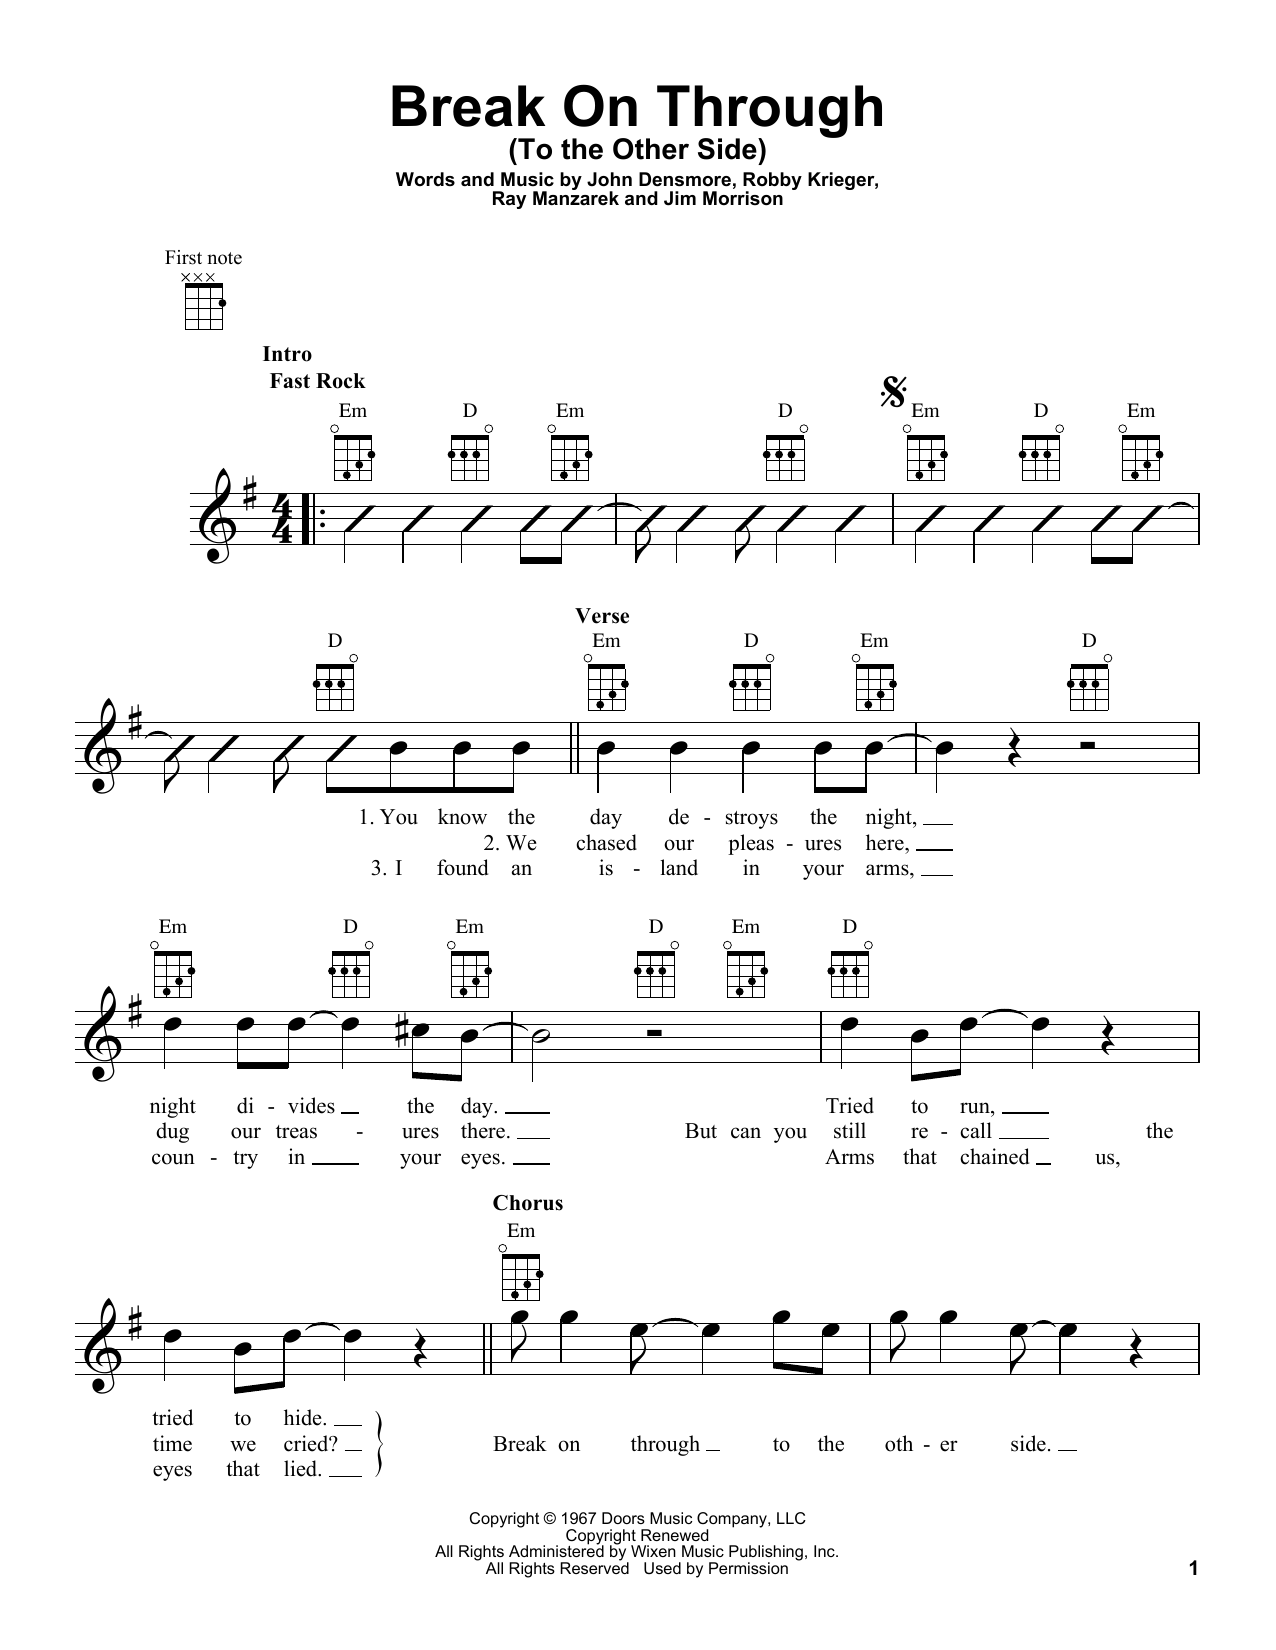 Download The Doors Break On Through (To The Other Side) Sheet Music